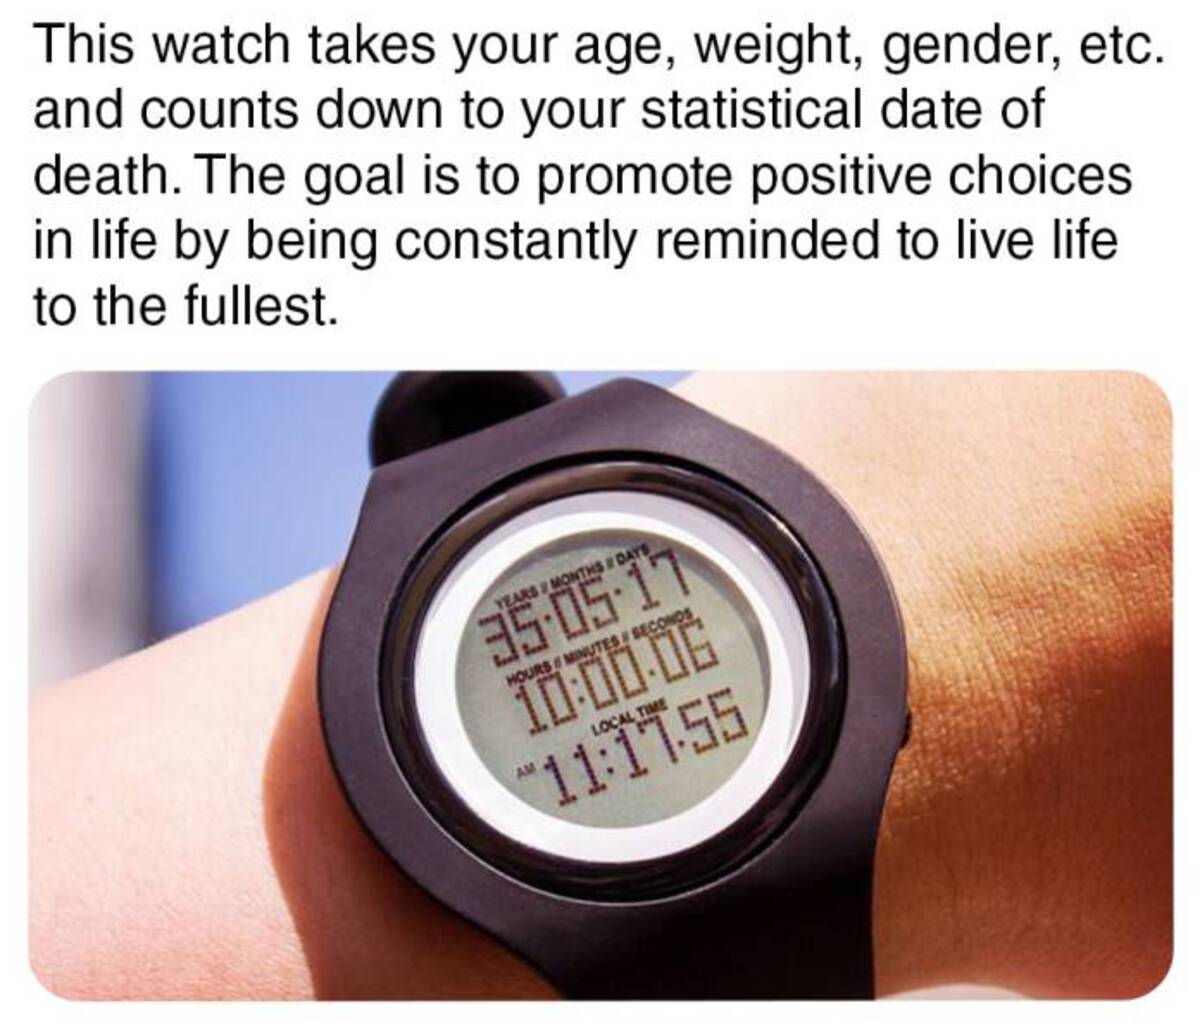 strap - This watch takes your age, weight, gender, etc. and counts down to your statistical date of death. The goal is to promote positive choices in life by being constantly reminded to live life to the fullest. Years & Monthsdays 35.05.17 Hours & Minute